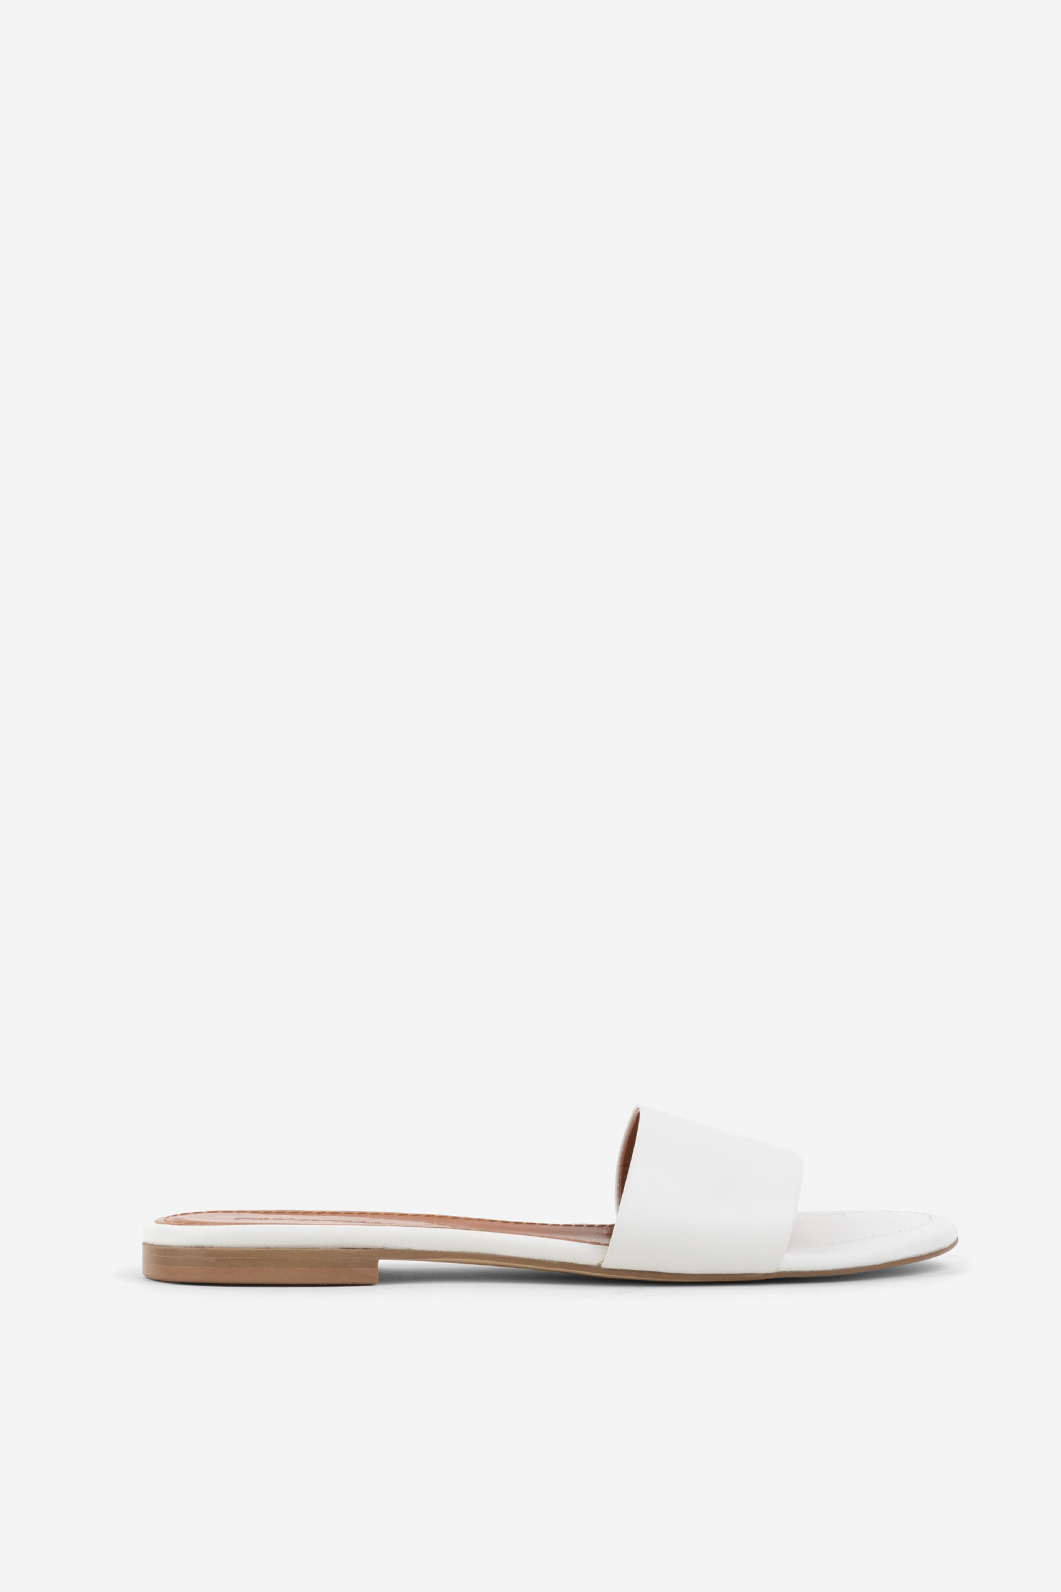 Reese white leather
sandals